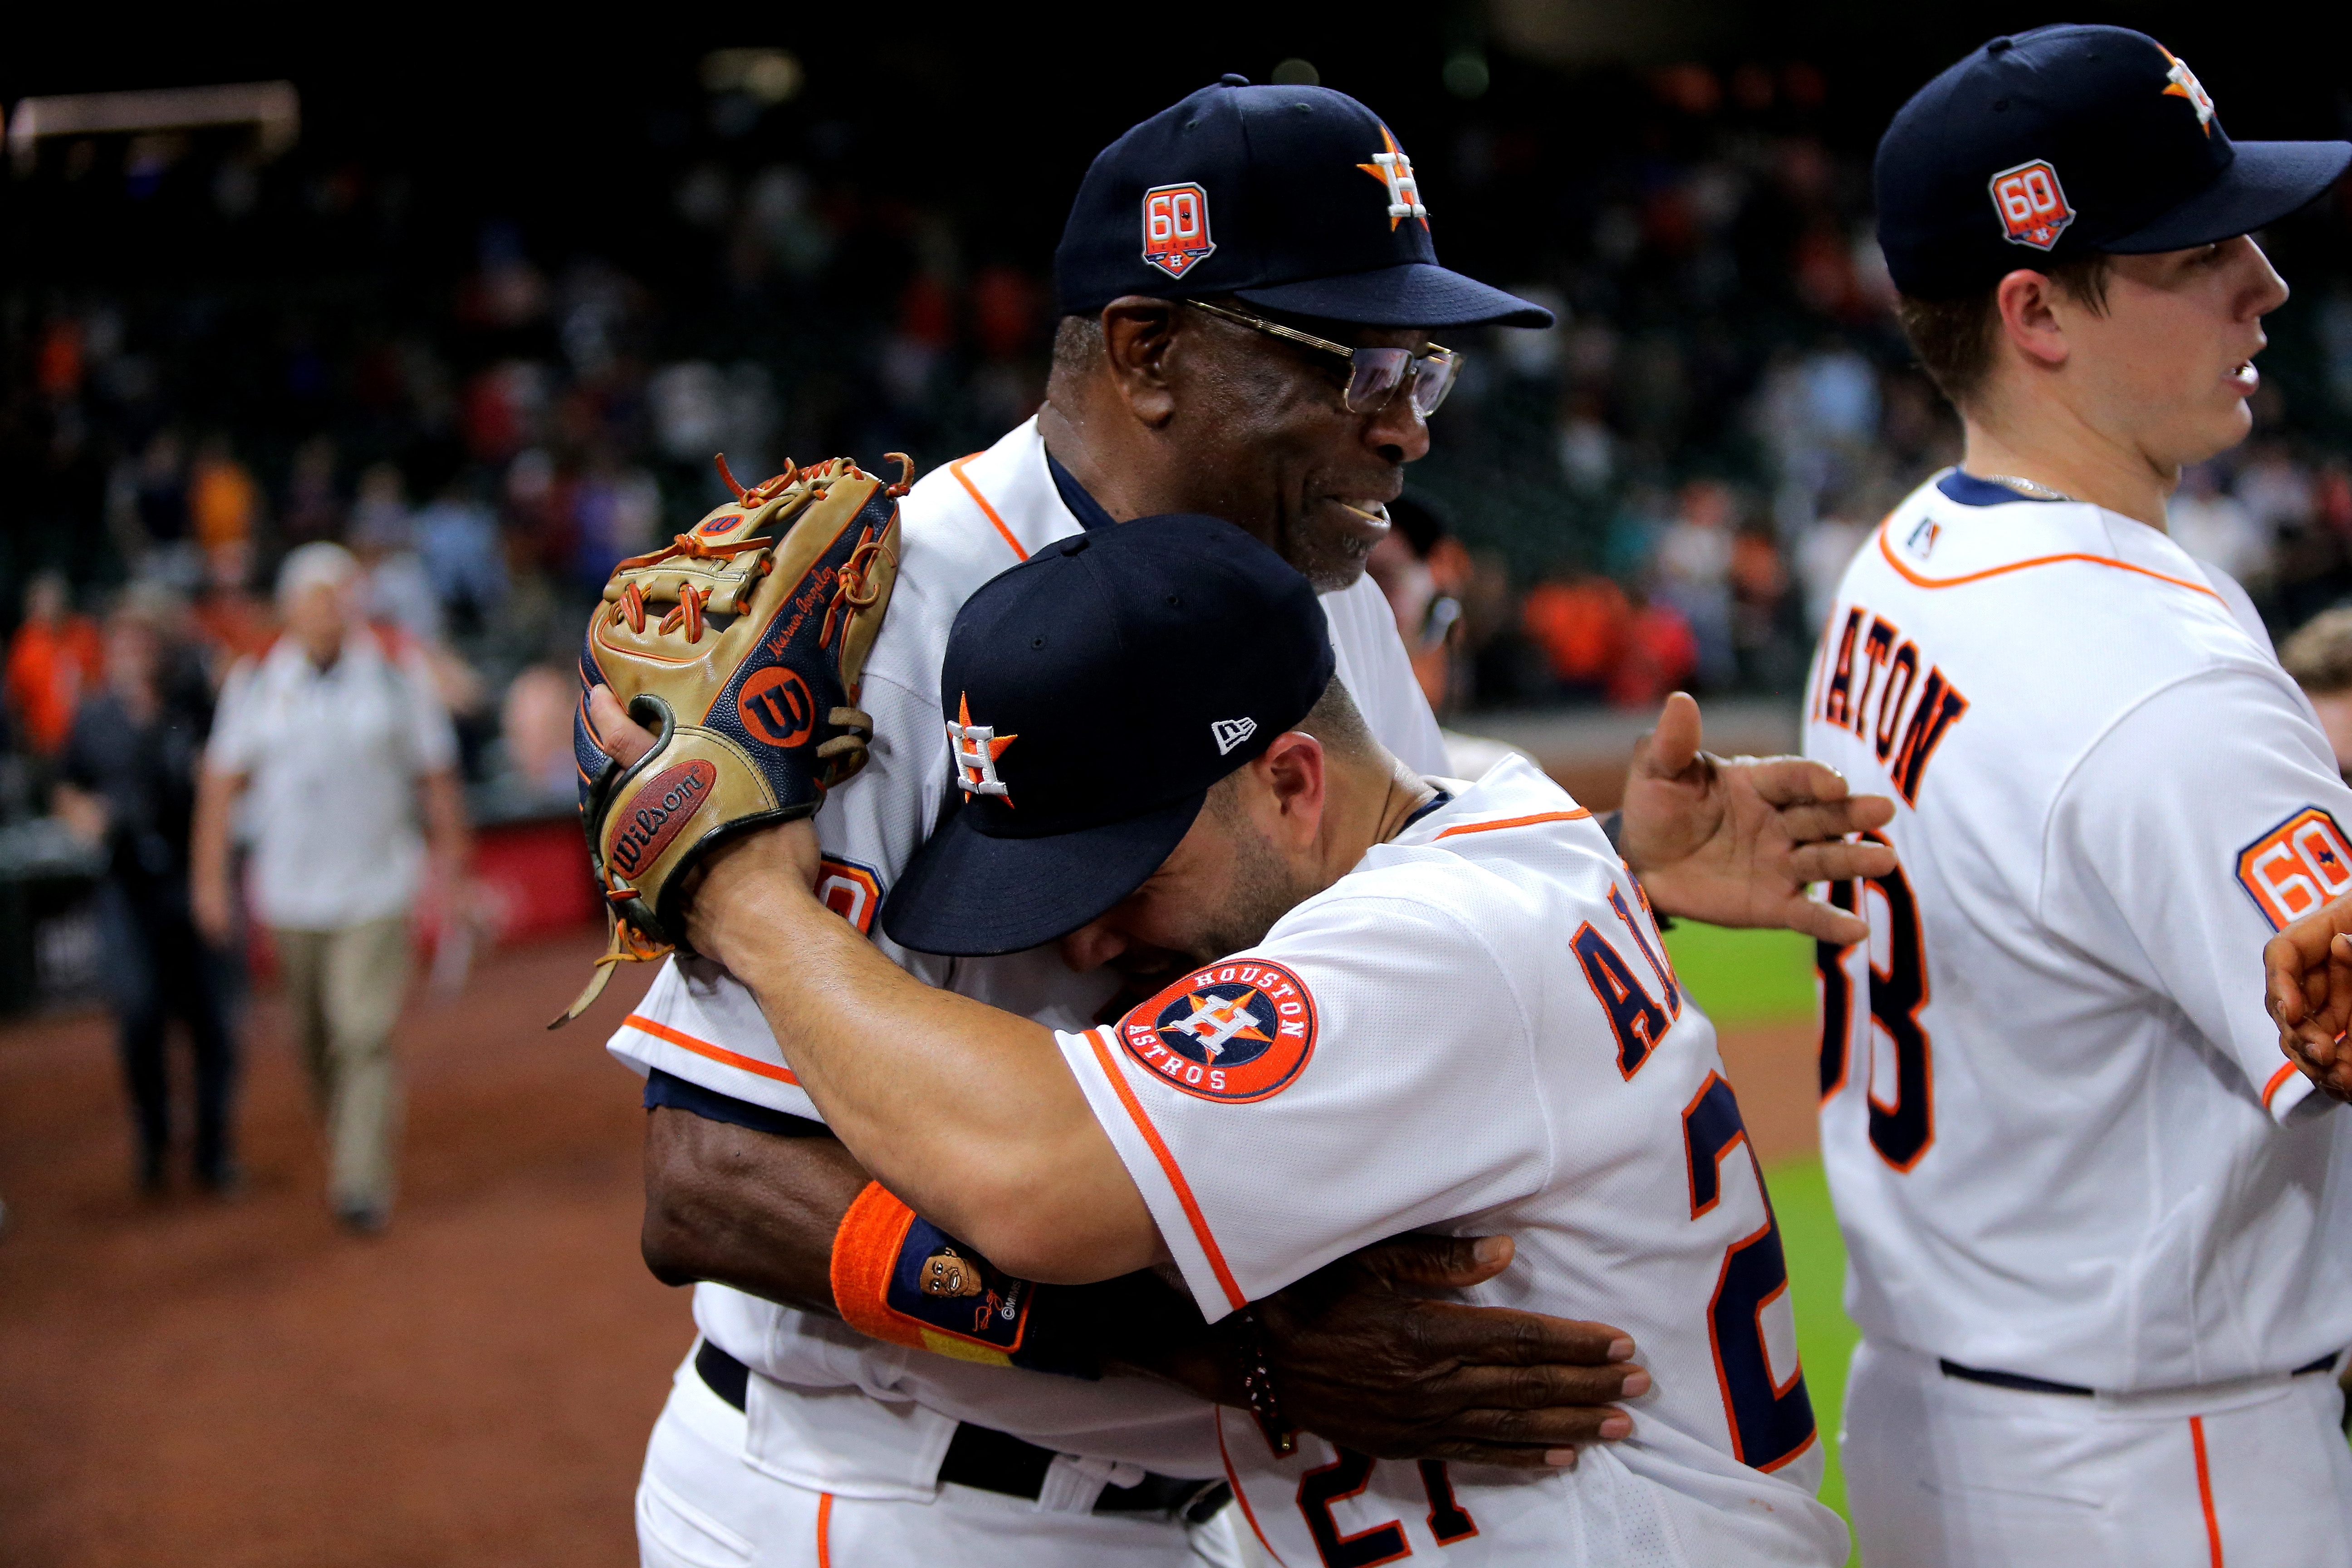 MLB roundup: Astros' Dusty Baker gets 2,000th win